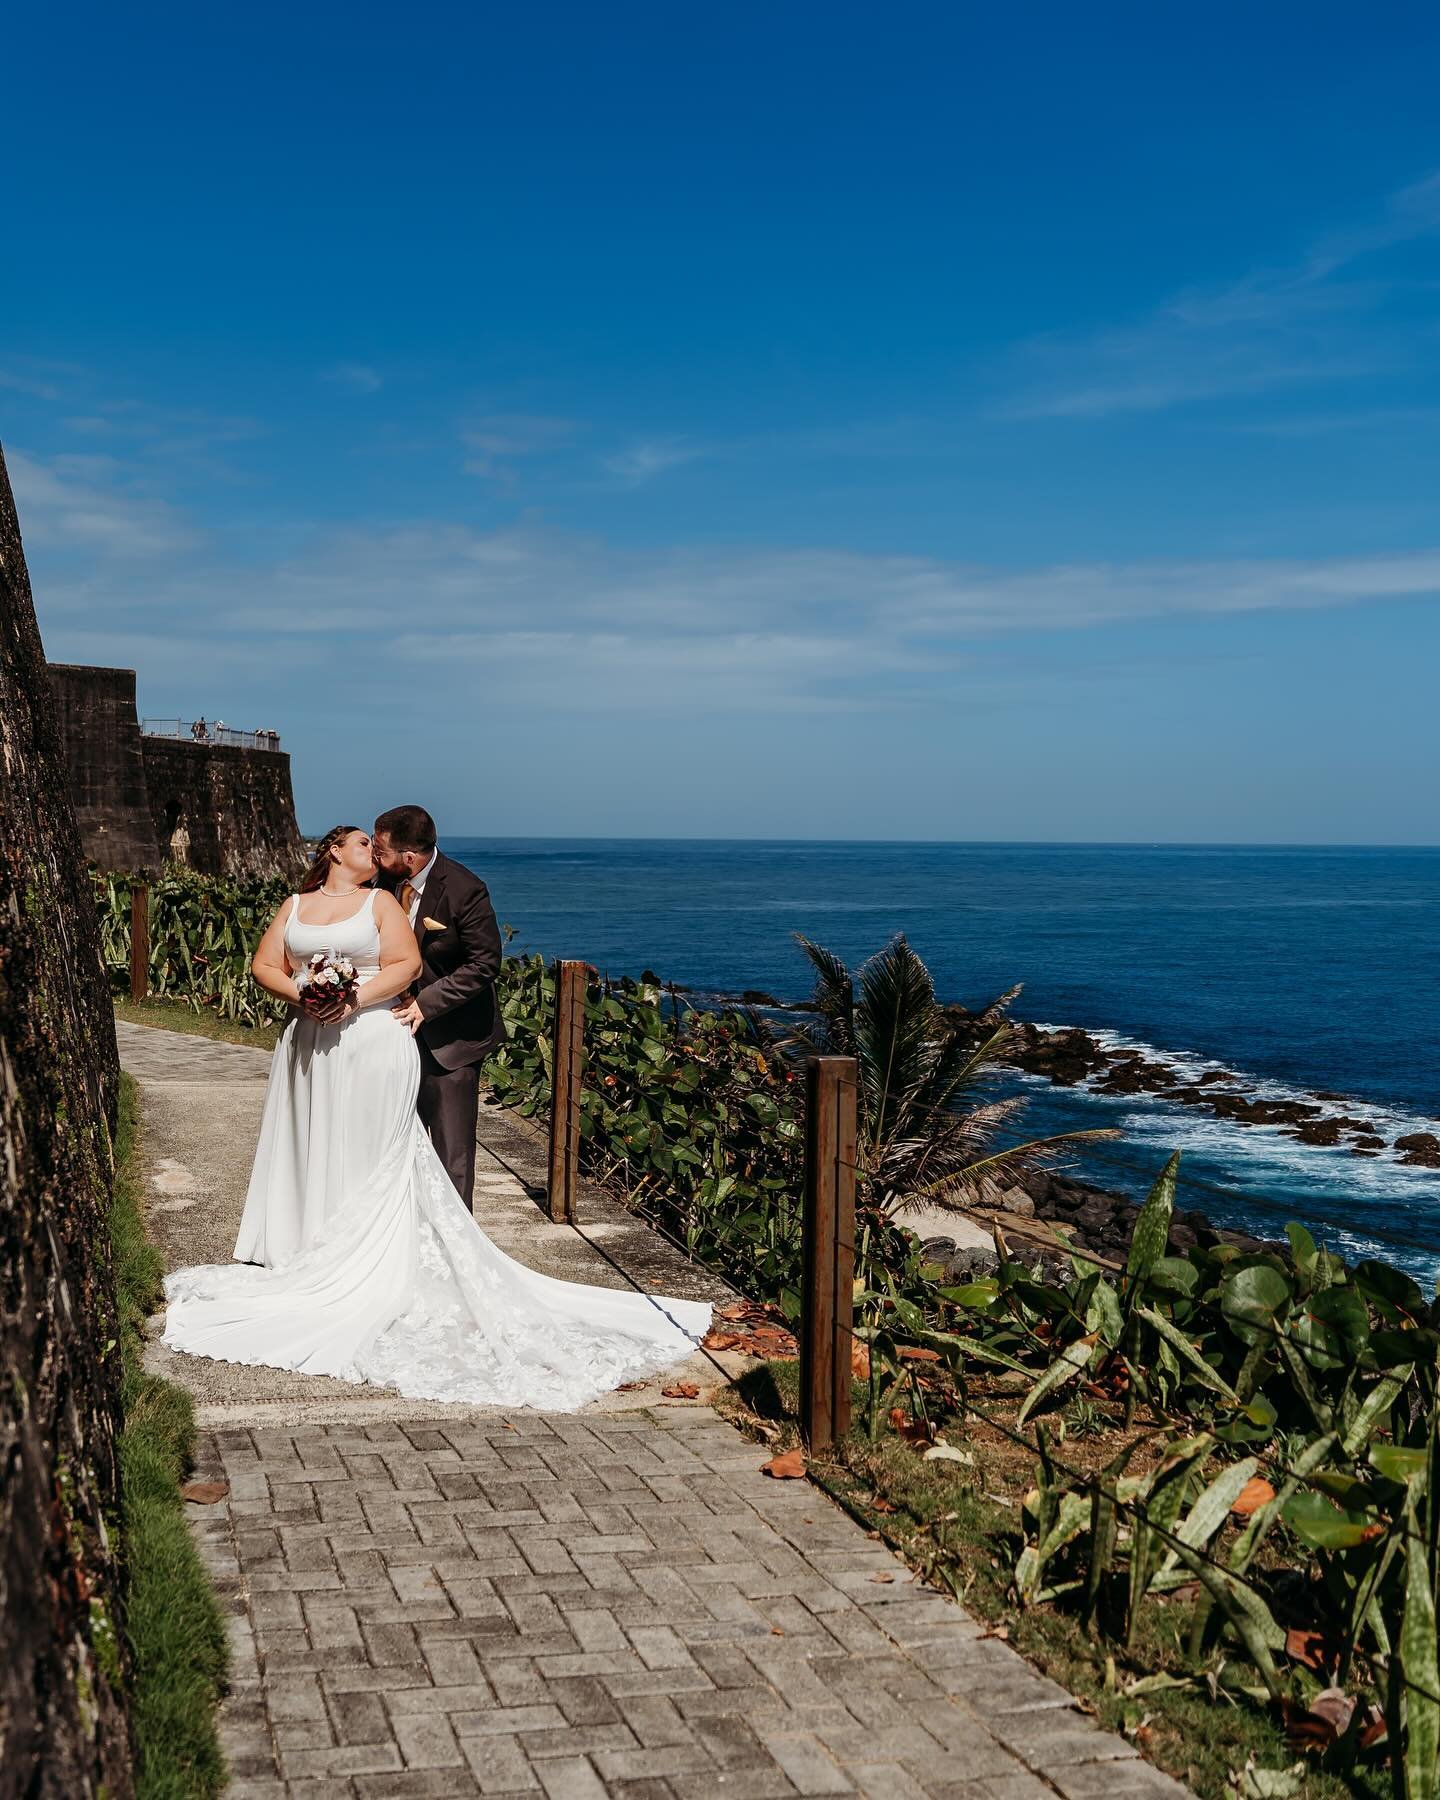 San Juan&hellip; you were everything. 🇵🇷 💗

Oh, ship! 🛳️ It&rsquo;s a wedding trip! 💍 
Pt. 03
.
.
.
.
#carnivalcruisewedding #cruisewedding #cruiseweddings #cruiseweddingphotographer #cruiseweddingphotography #carnivalcruiseweddingphotography